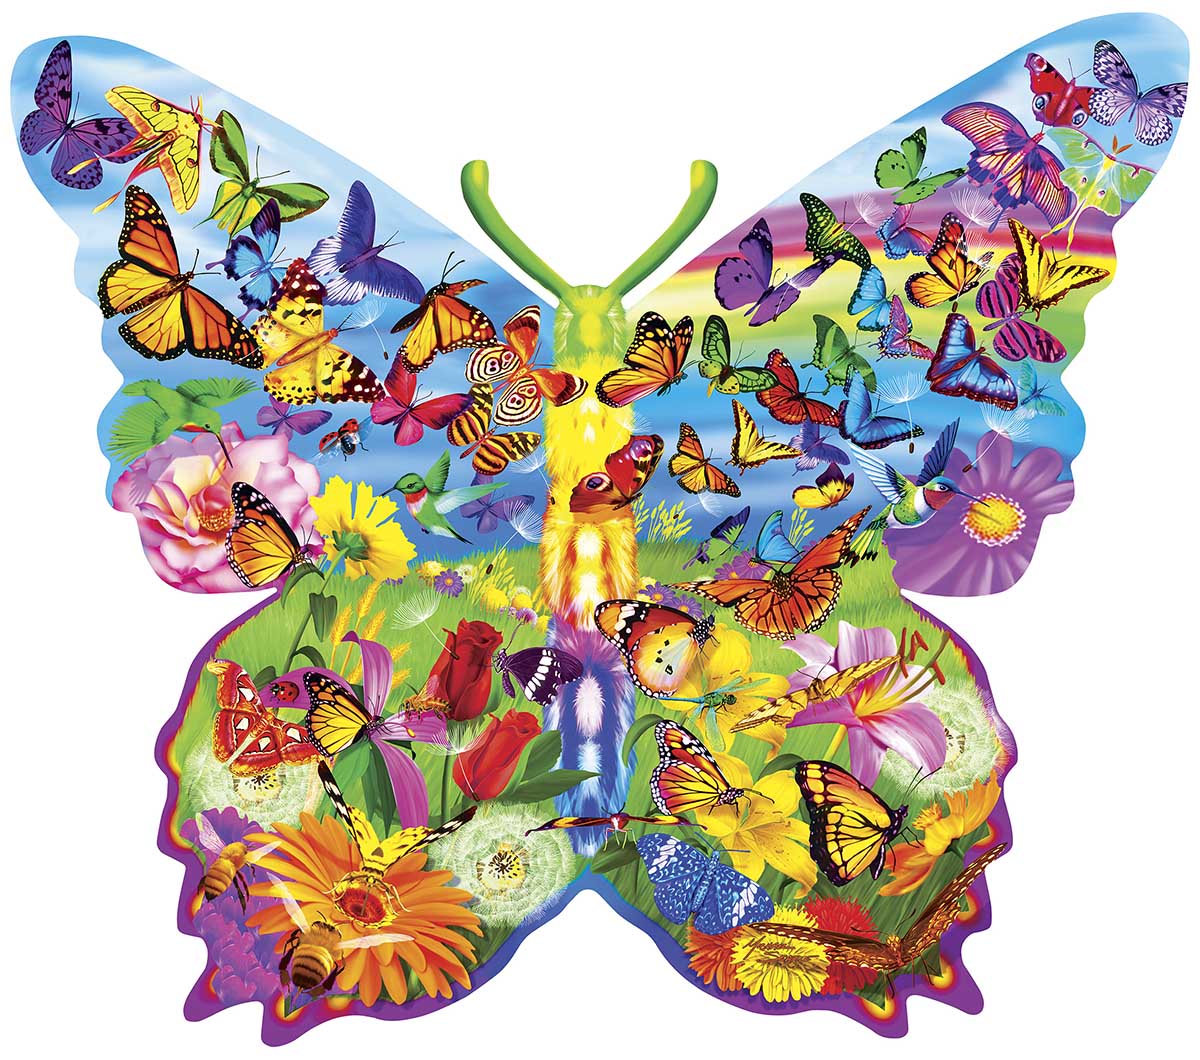 Butterfly Butterflies and Insects Shaped Puzzle